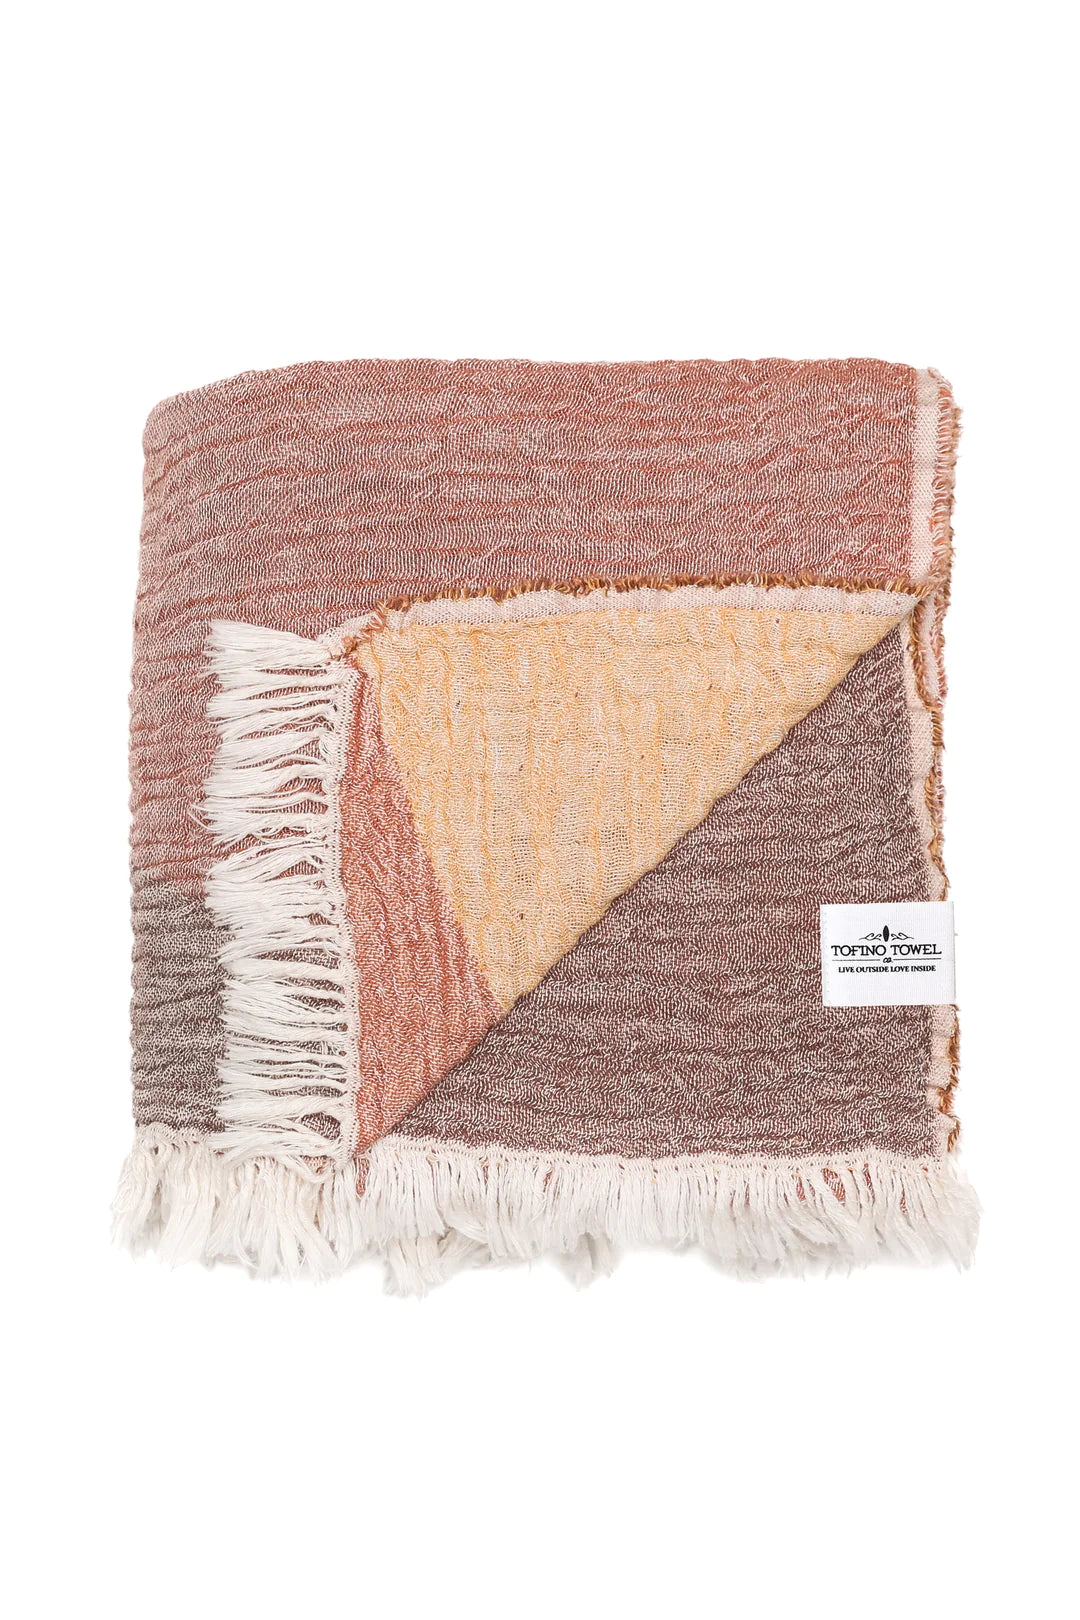 The Meander Throw - Wild and Heart